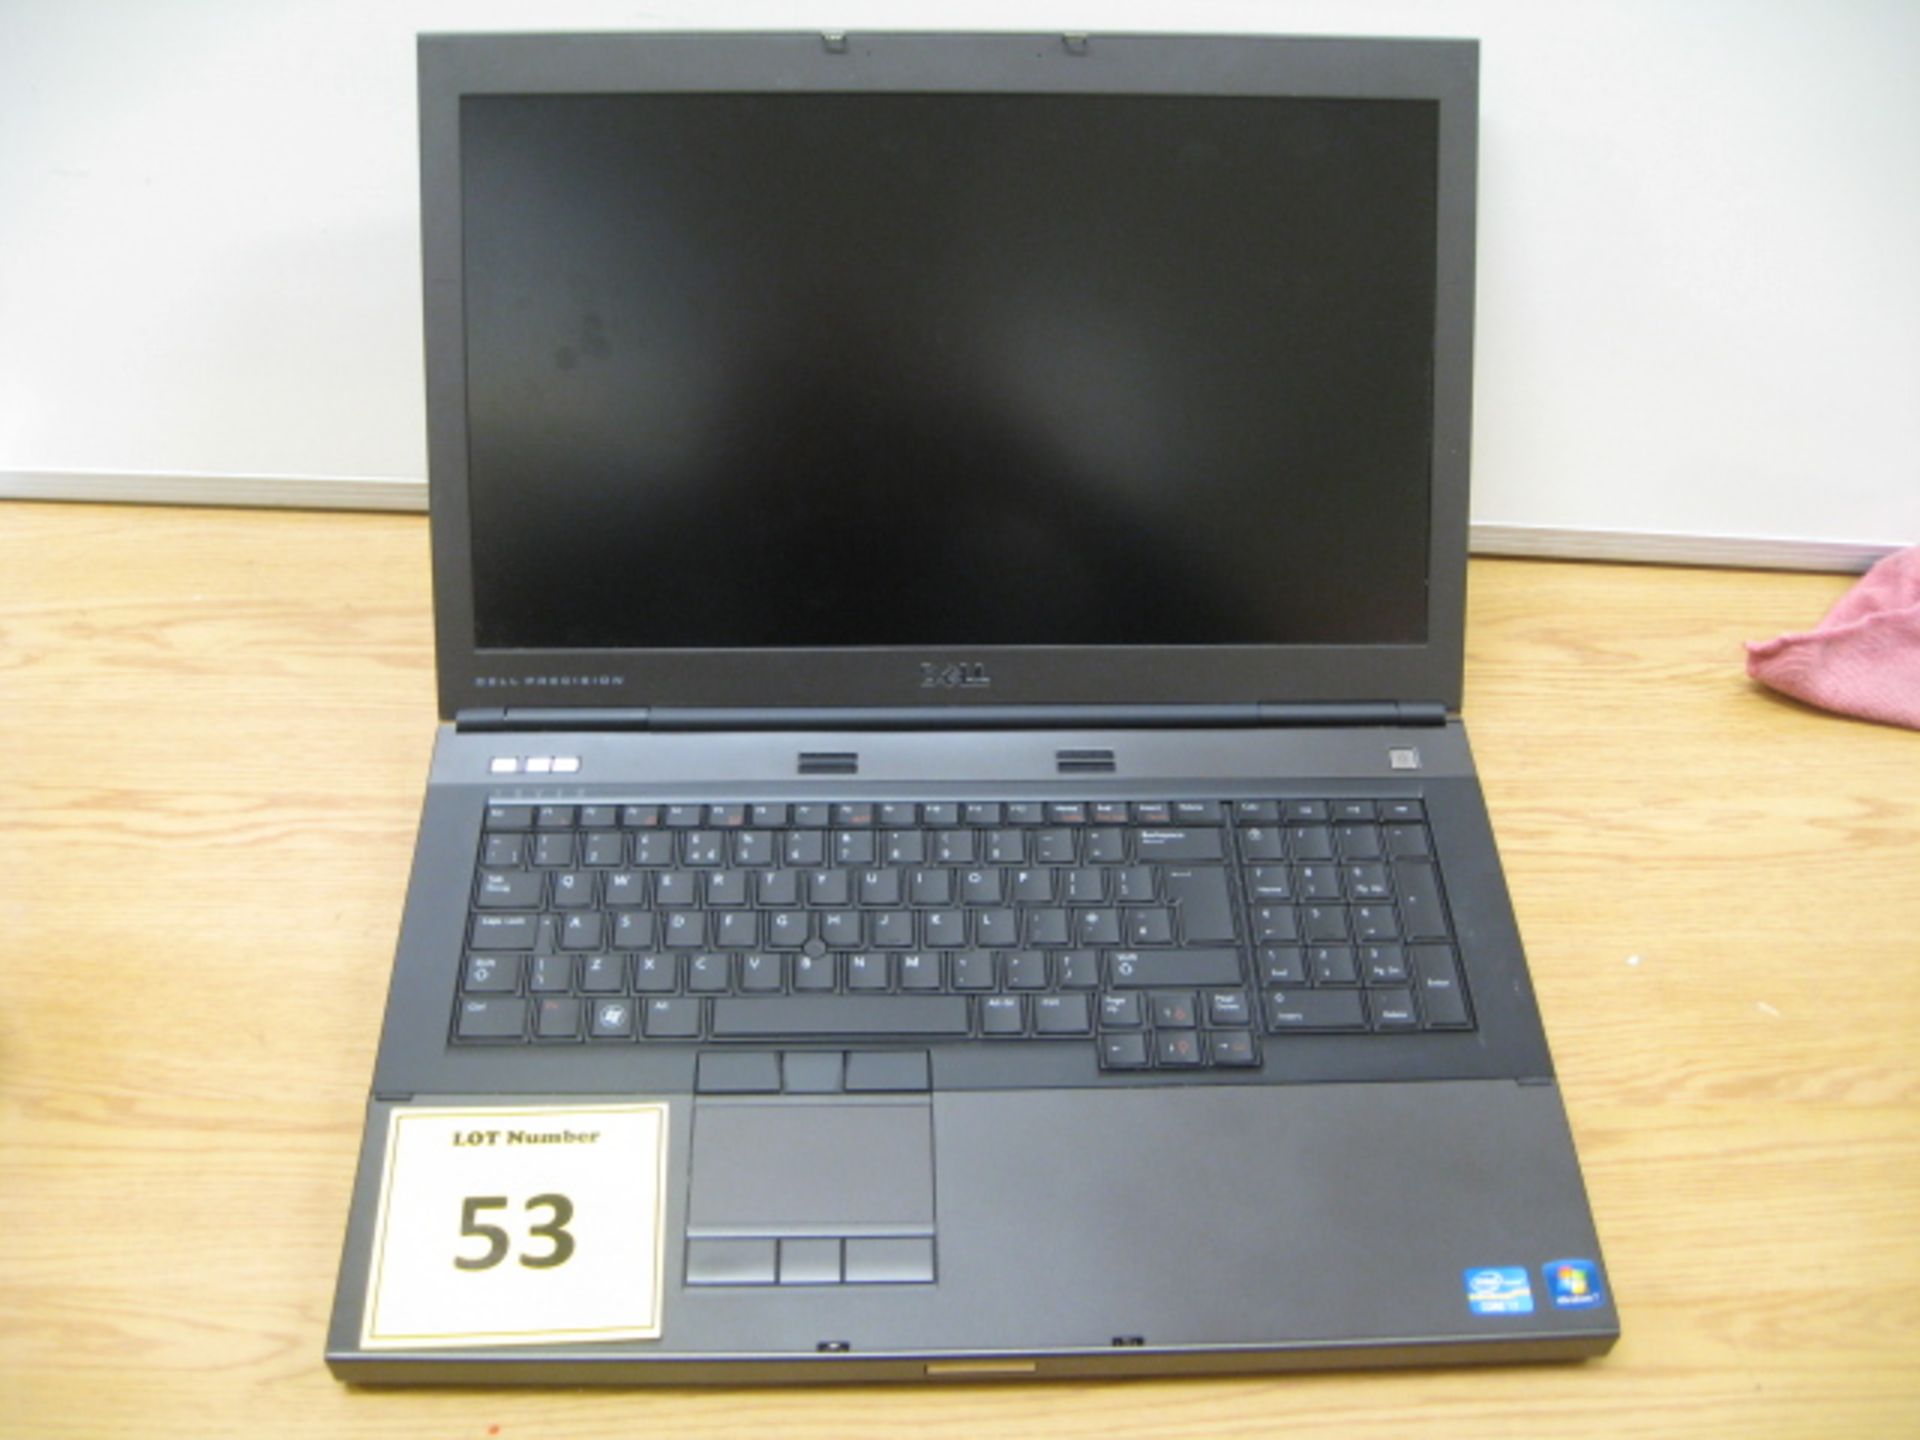 DELL PRECISION M6600 CORE i7 2.3GHZ, 17" LAPTOP. 8GB RAM 750 GB HDD, DVDRW. PROBLEM WITH GRAPHICS-